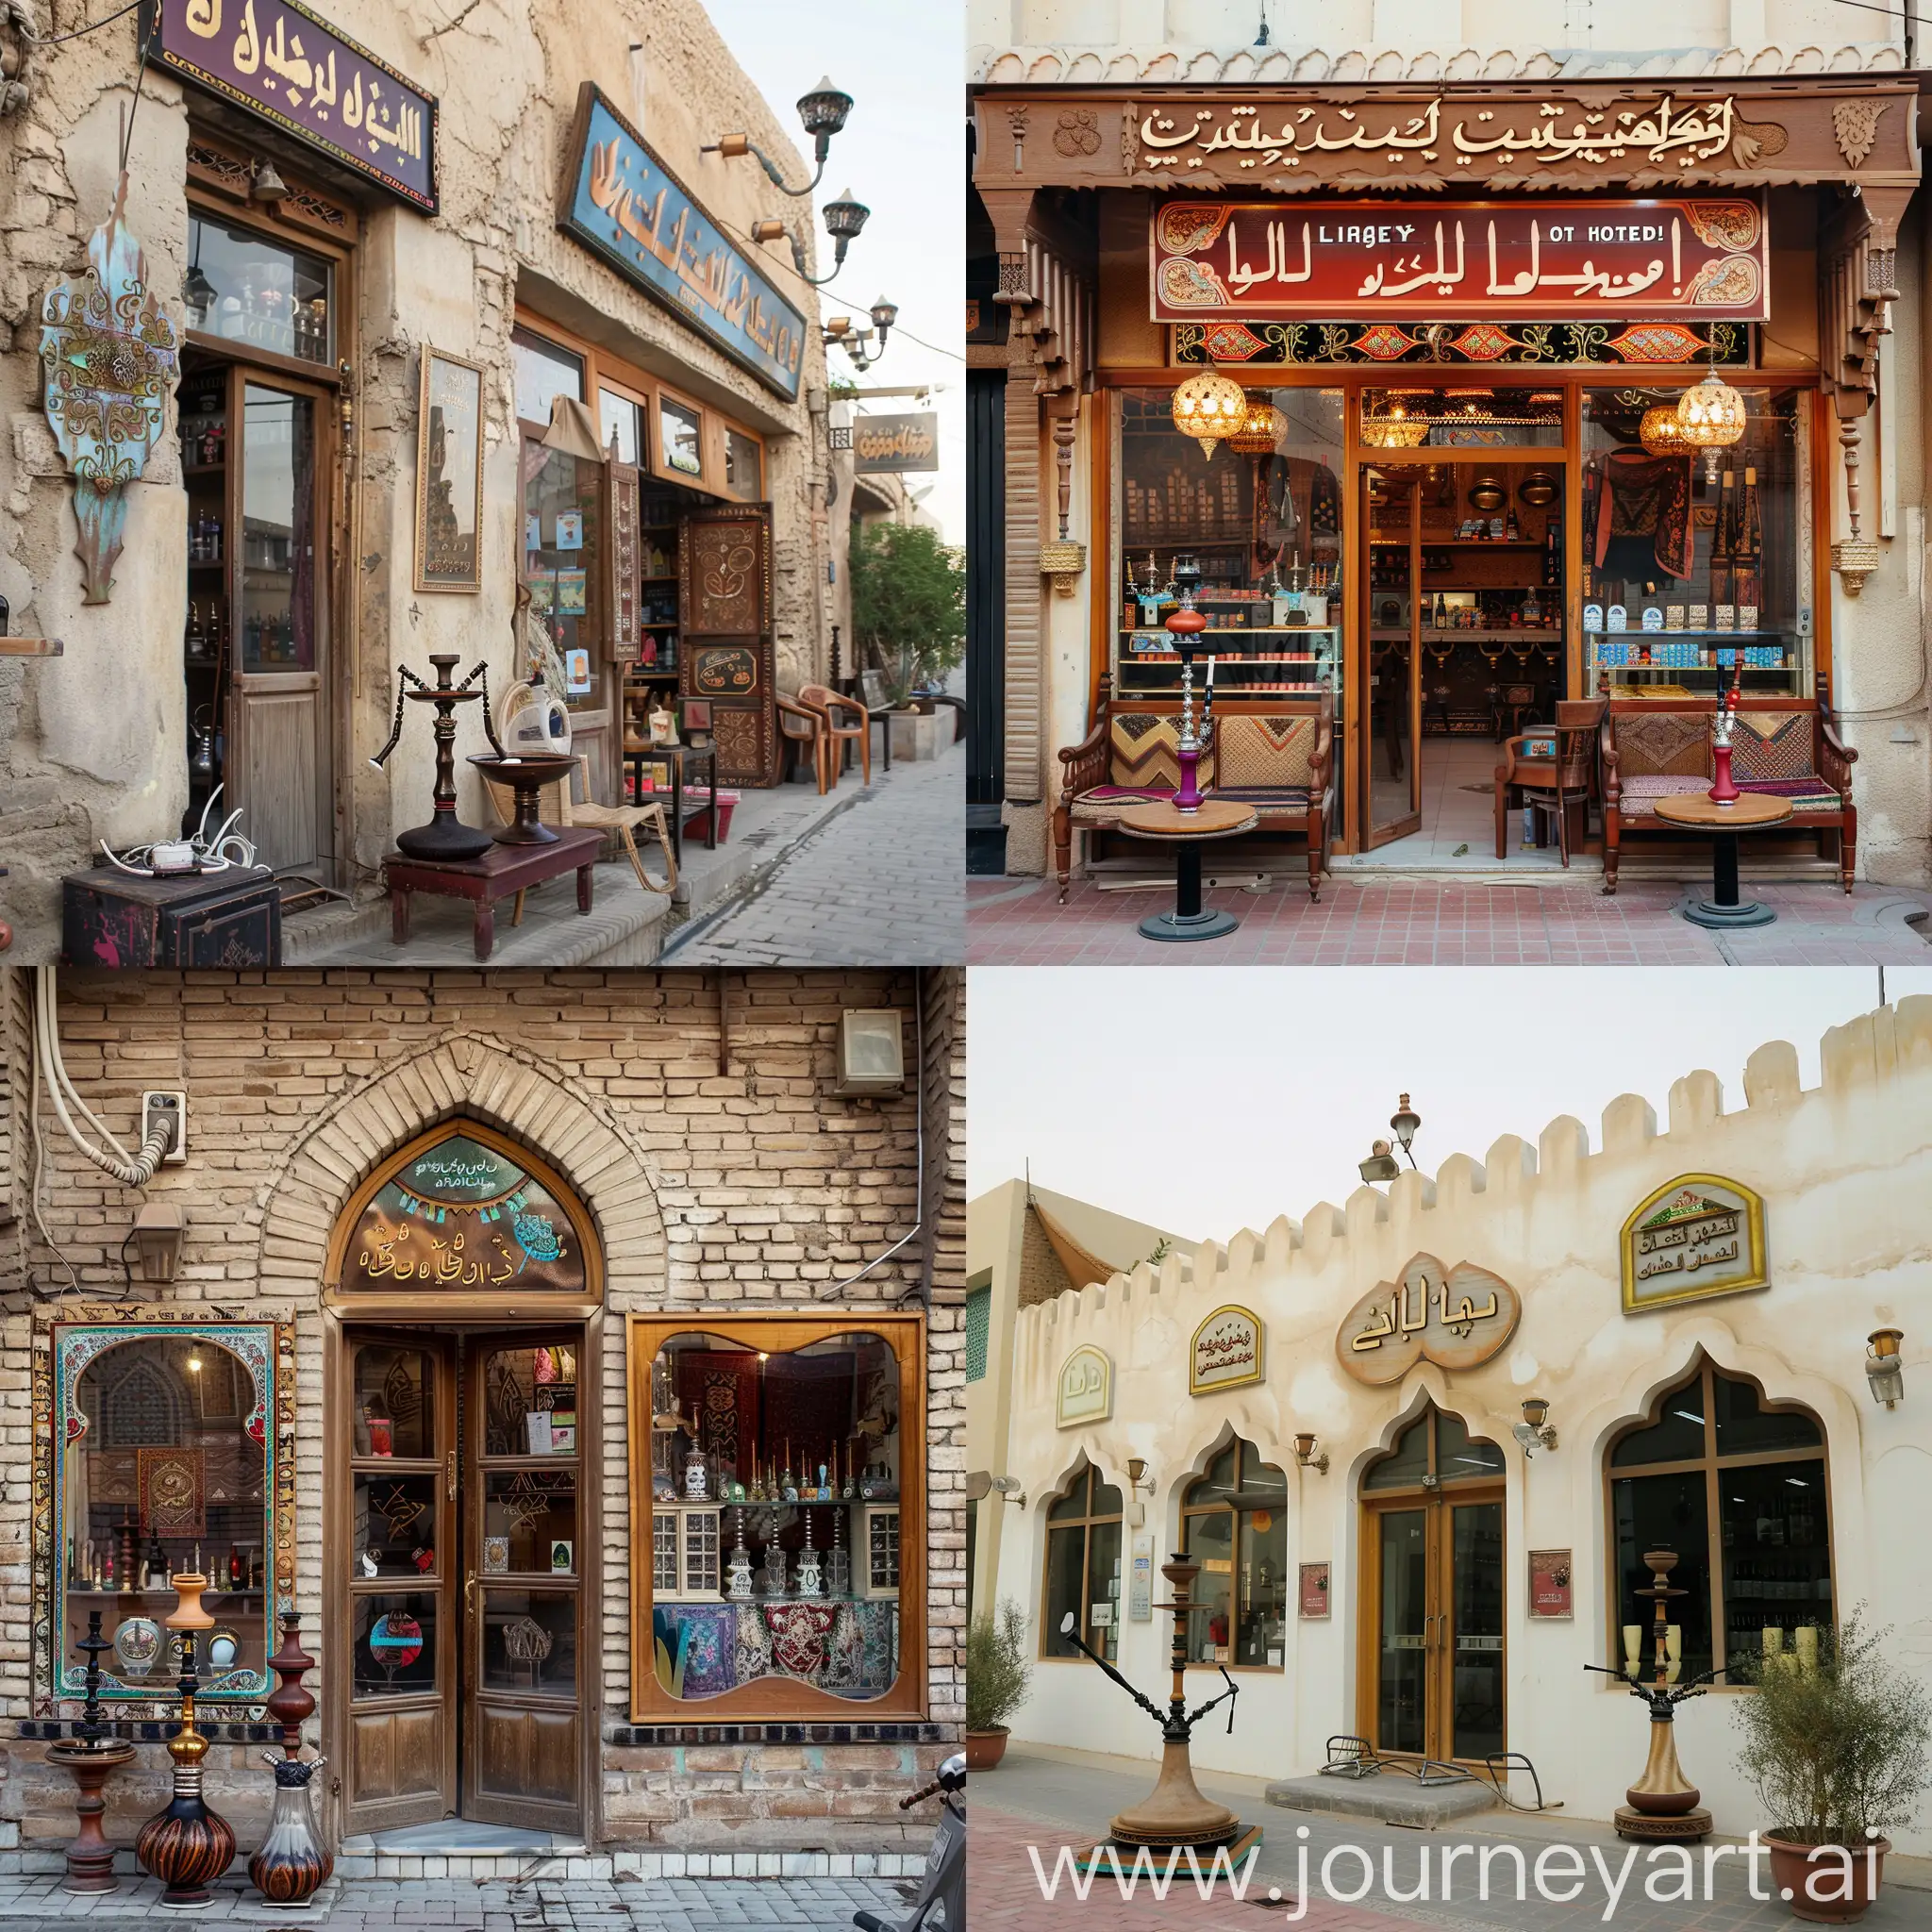 The exterior of a hookah and tobacco shop in traditional style